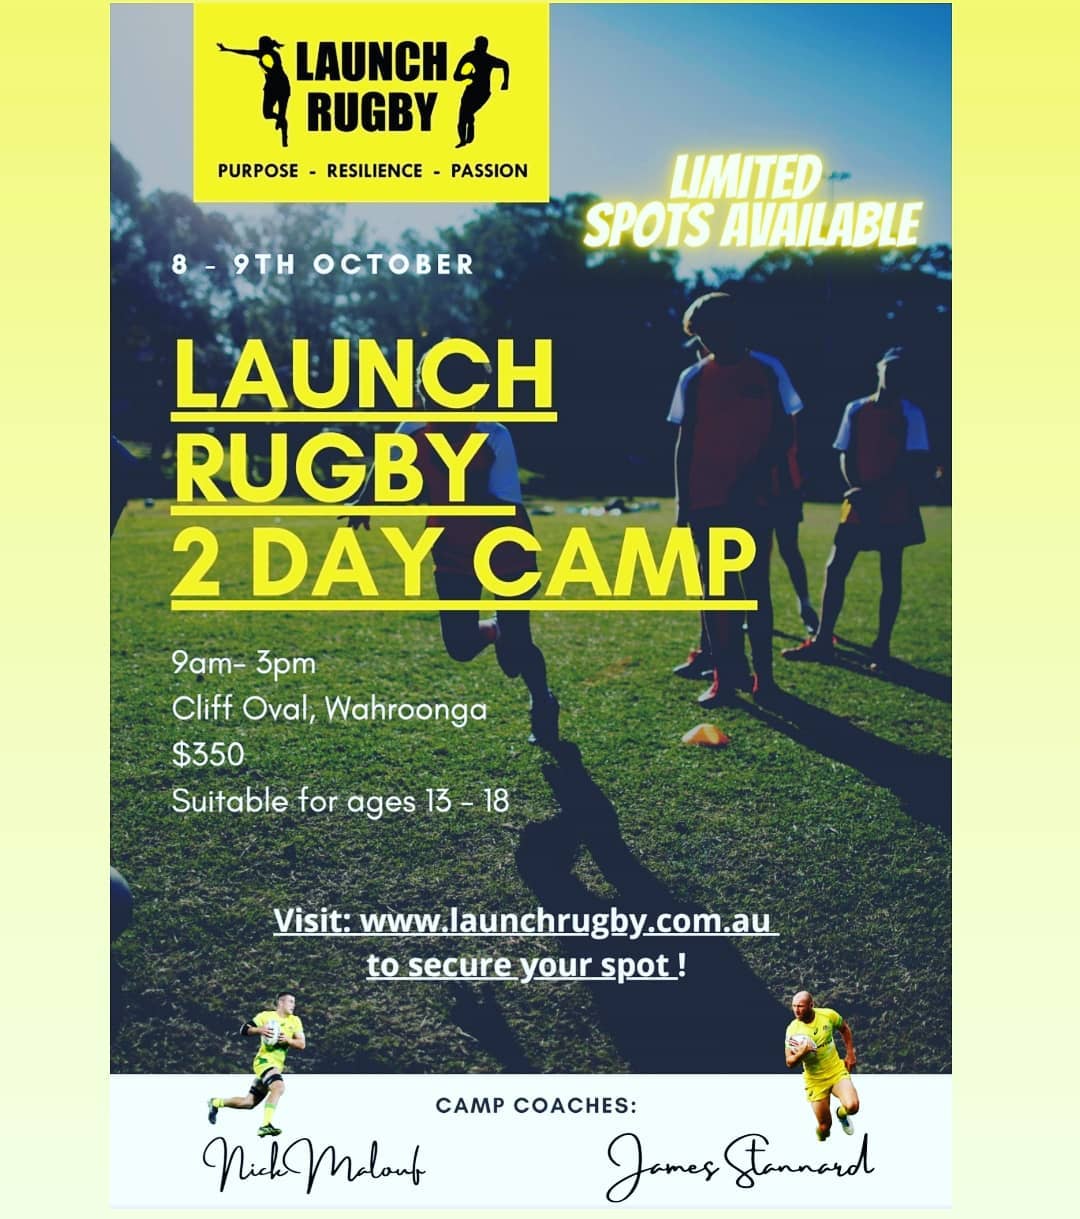 To secure your spot at the Launch Rugby 2 day camp visit:...